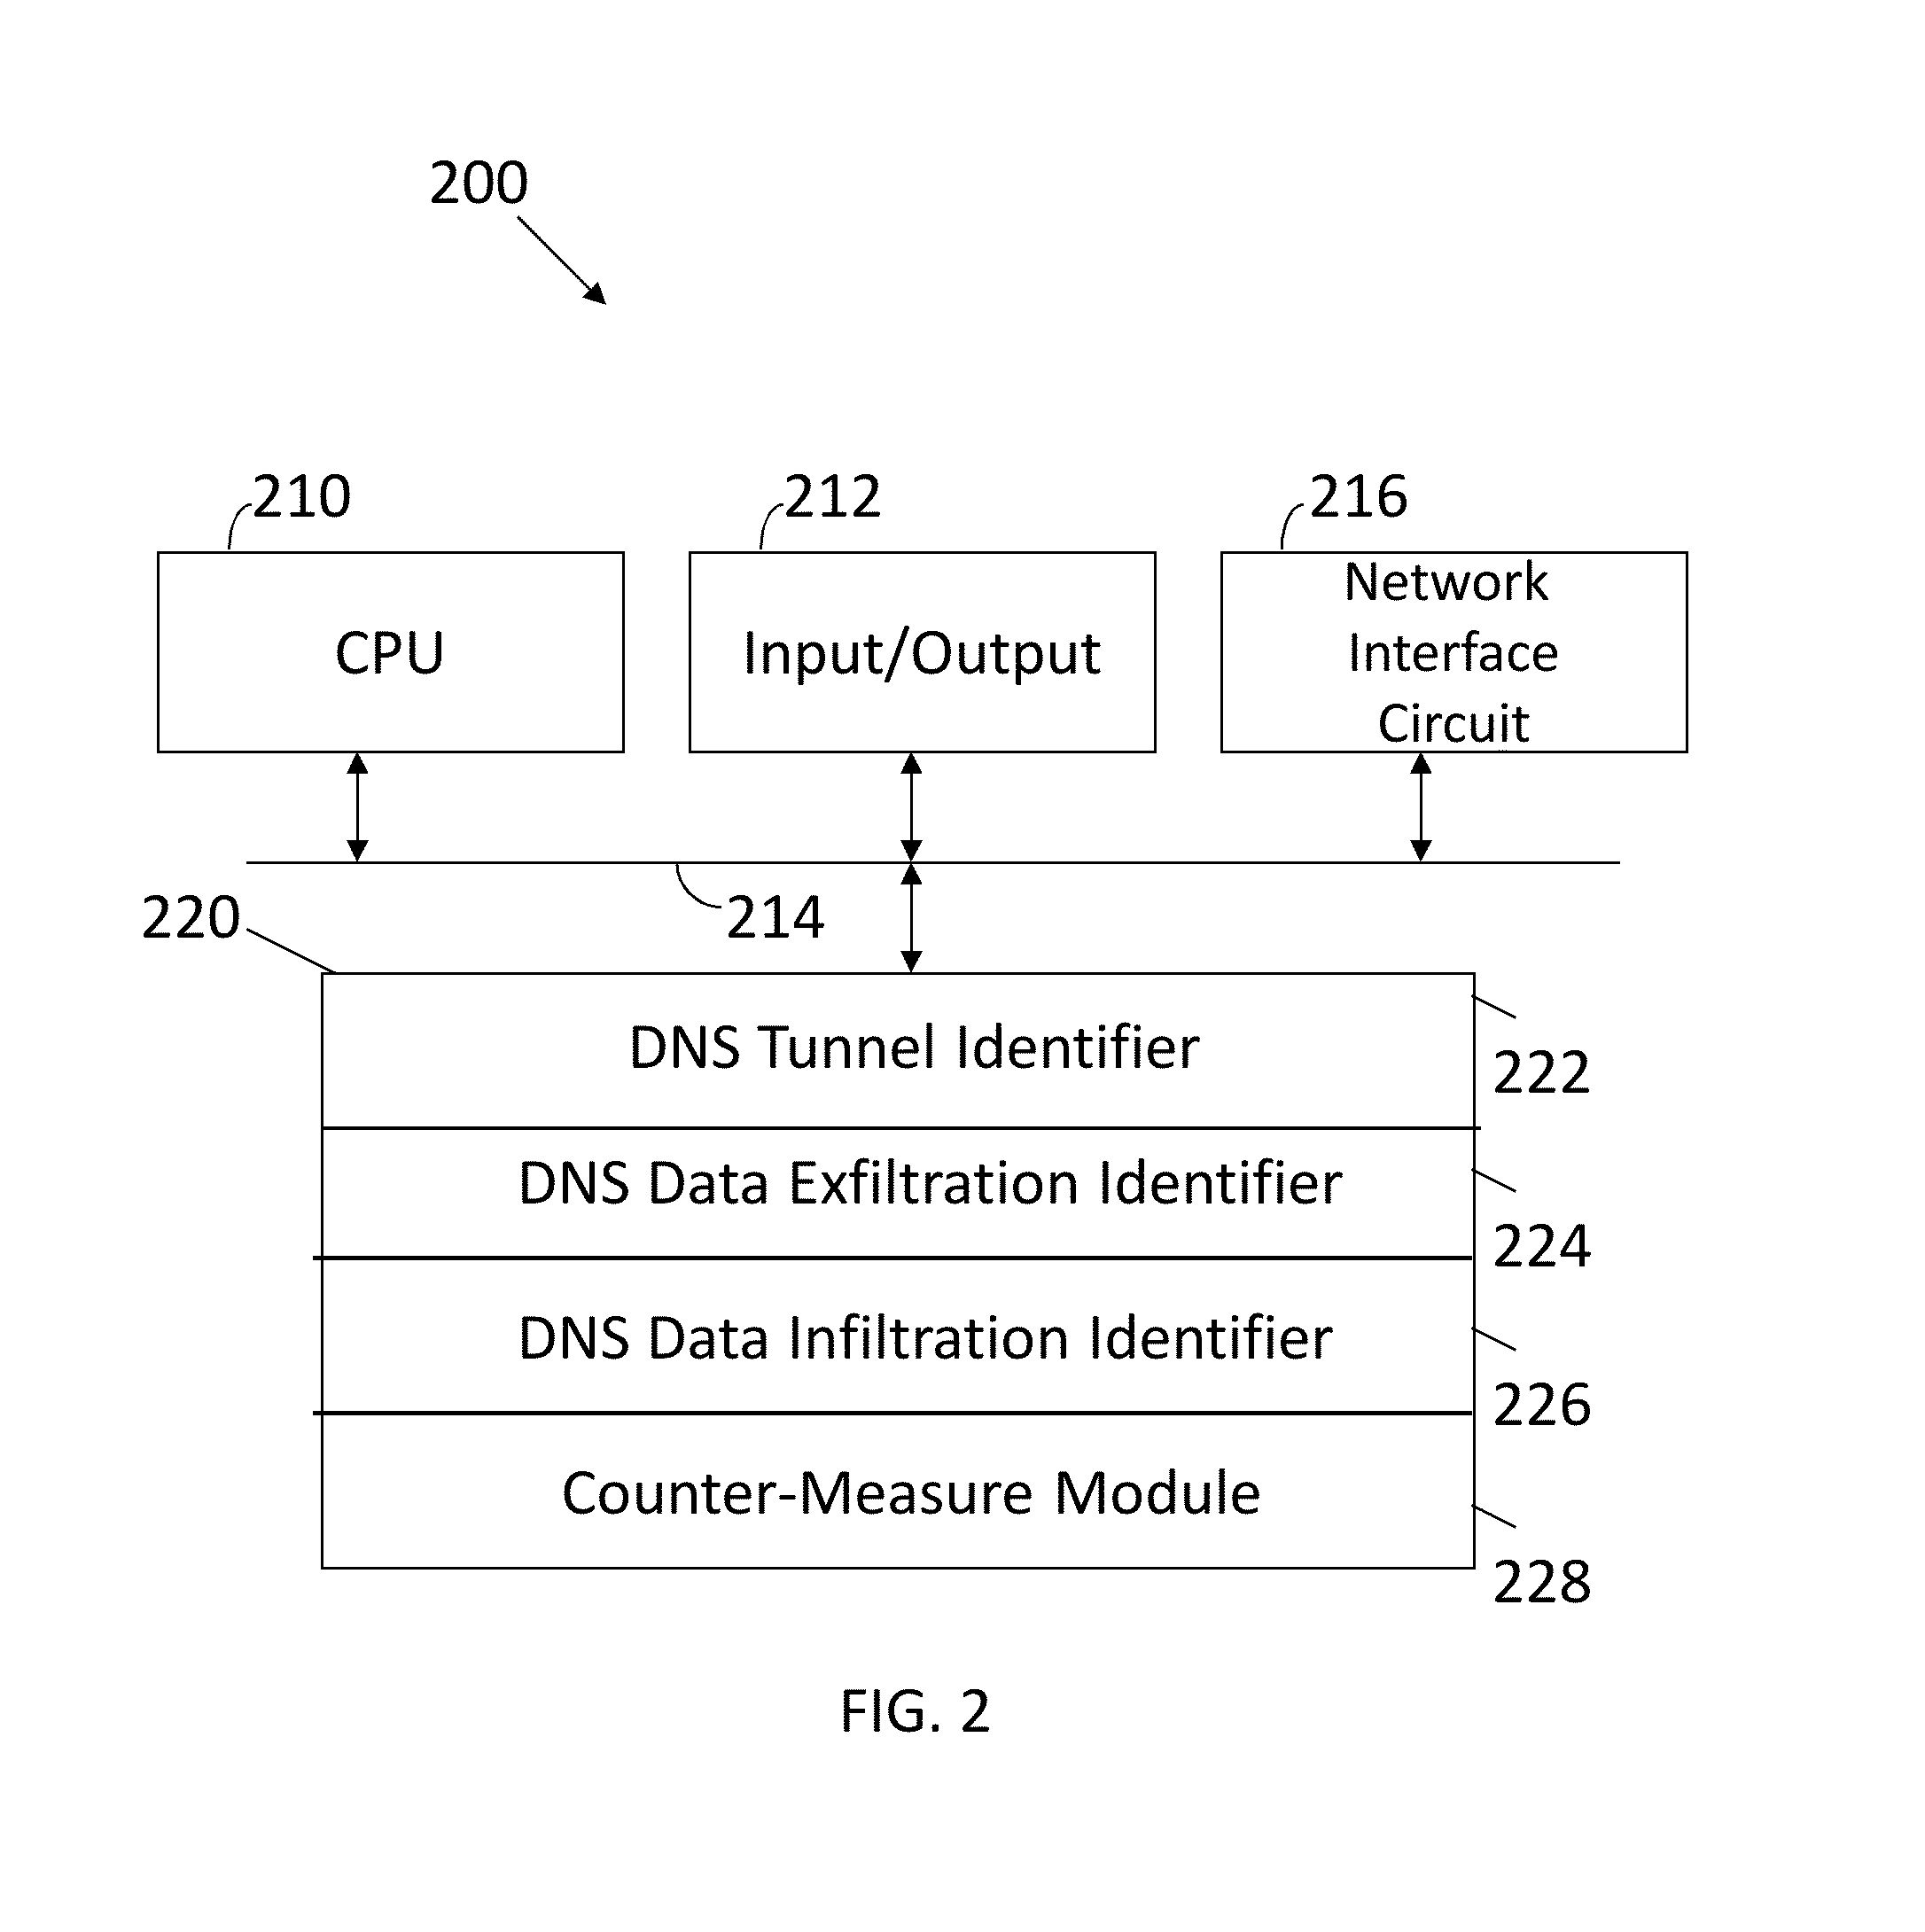 Apparatus and Method for Identifying Domain Name System Tunneling, Exfiltration and Infiltration